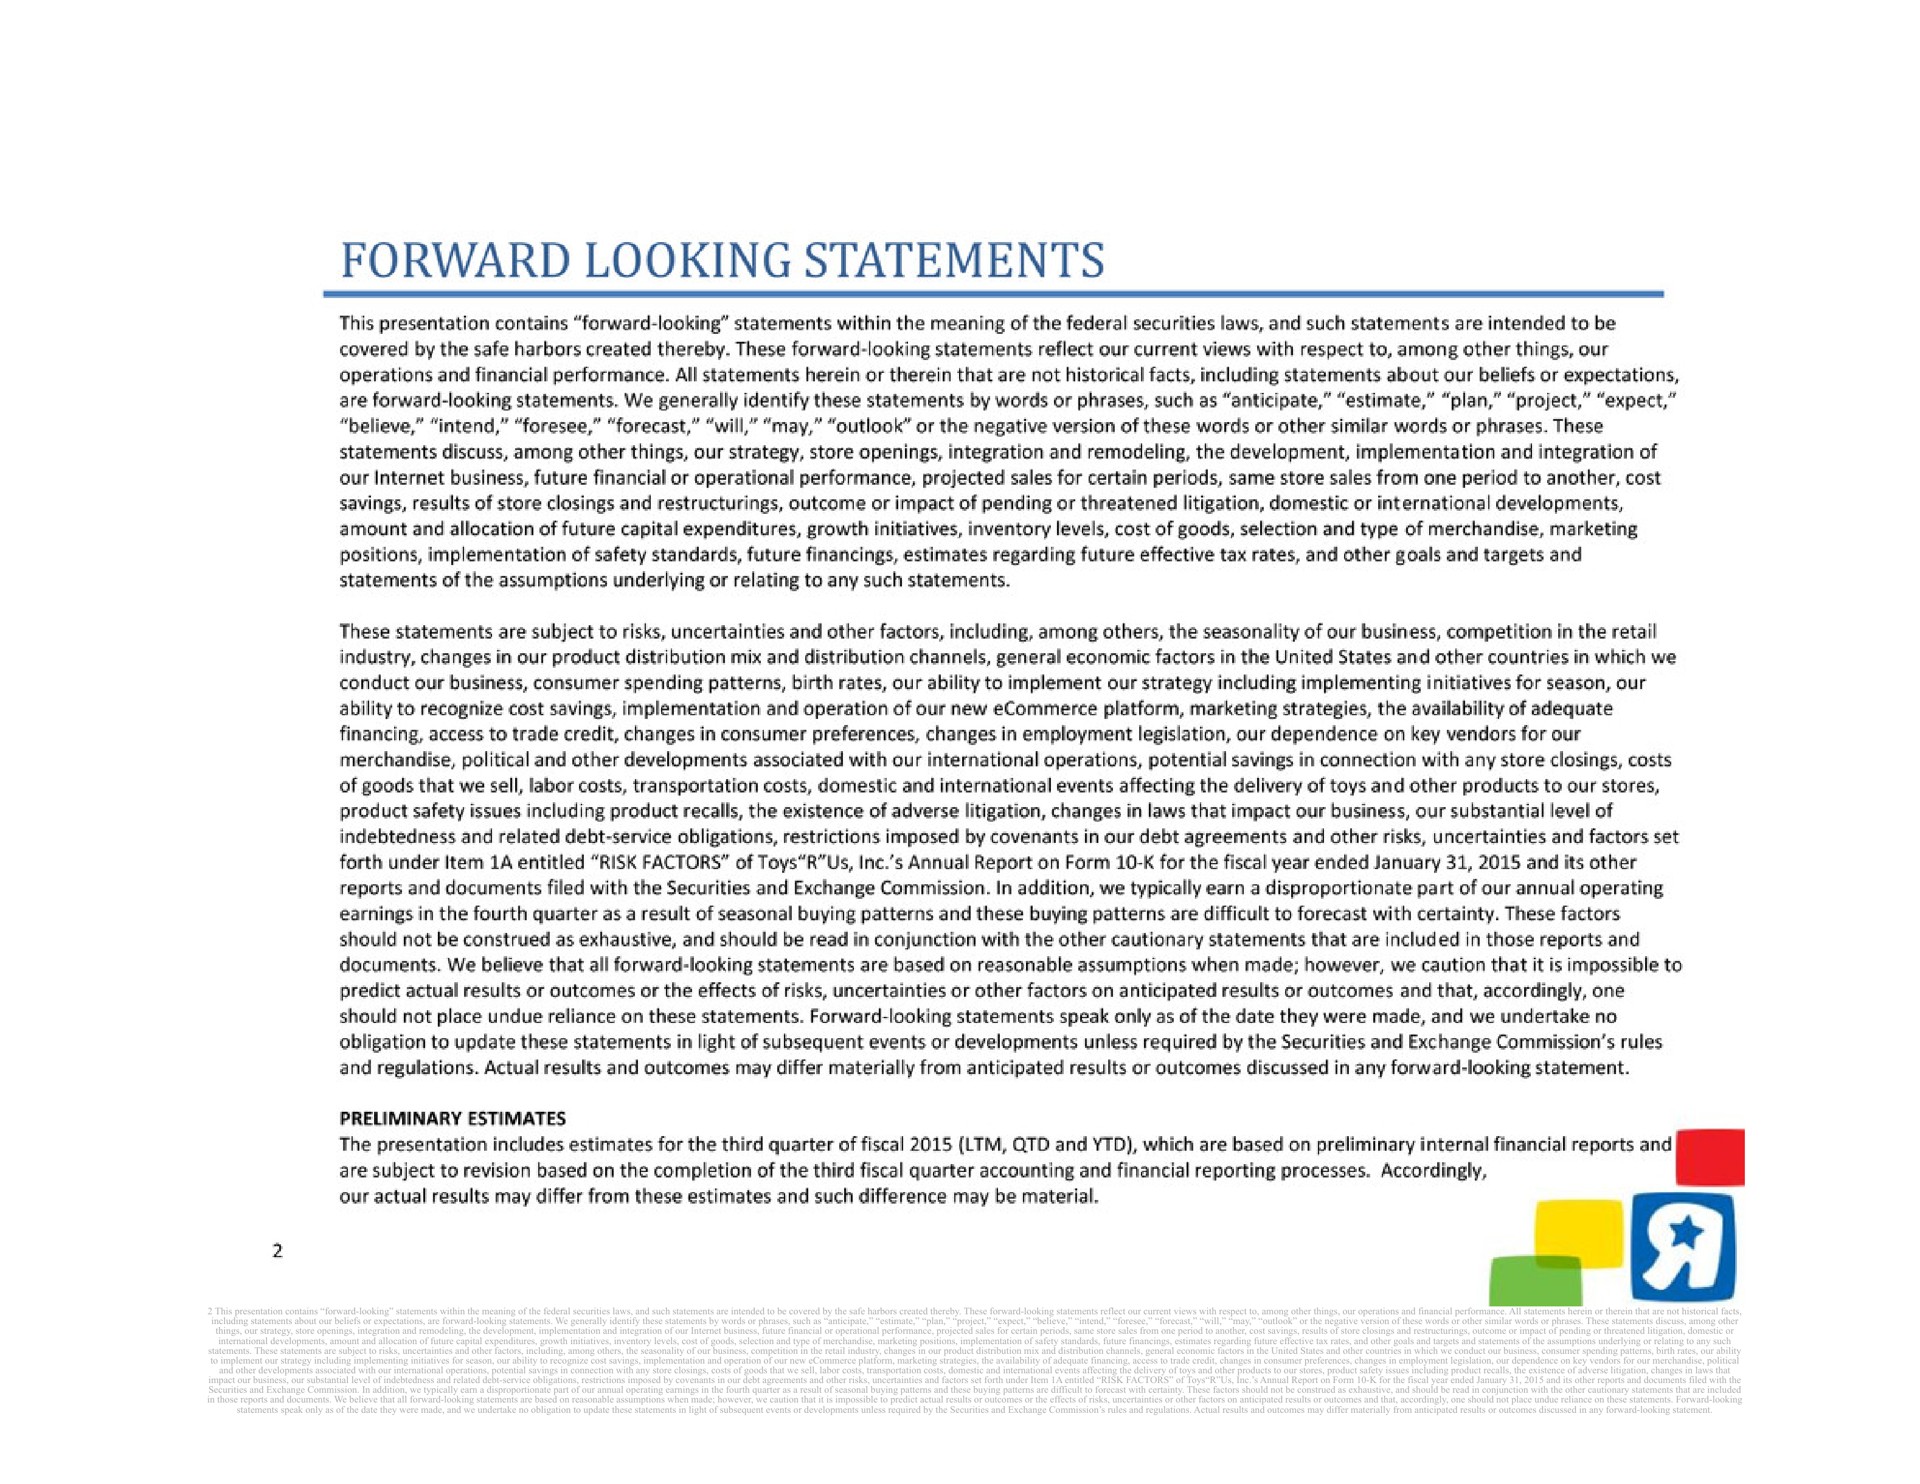 this presentation contains forward looking statements within the meaning of the federal securities laws and such statements are intended to be covered by the safe harbors created thereby these forward looking statements reflect our current views with respect to among other things our operations and financial performance all statements herein or therein that are not historical facts including statements about our beliefs or expectations are forward looking statements we generally identify these statements by words or phrases such as anticipate estimate plan project expect believe intend foresee forecast will may outlook or the negative version of these words or other similar words or phrases these statements discuss among other things our strategy store openings integration and remodeling the development implementation and integration of our business future financial or operational performance projected sales for certain periods same store sales from one period to another cost savings results of store closings and outcome or impact of pending or threatened litigation domestic or international developments amount and allocation of future capital expenditures growth initiatives inventory levels cost of goods selection and type of merchandise marketing positions implementation of safety standards future financings estimates regarding future effective tax rates and other goals and targets and statements of the assumptions underlying or relating to any such statements these statements are subject to risks uncertainties and other factors including among the seasonality of our business competition in the retail industry changes in our product distribution mix and distribution channels general economic factors in the united states and other countries in which we conduct our business consumer spending patterns birth rates our ability to implement our strategy including implementing initiatives for season our ability to recognize cost savings implementation and operation of our new platform marketing strategies the availability of adequate financing access to trade credit changes in consumer preferences changes in employment legislation our dependence on key vendors for our merchandise political and other developments associated with our international operations potential savings in connection with any store closings costs of goods that we sell labor costs transportation costs domestic and international events affecting the delivery of toys and other products to our stores product safety issues including product recalls the existence of adverse litigation changes in laws that impact our business our substantial level of indebtedness and related debt service obligations restrictions imposed by covenants in our debt agreements and other risks uncertainties and factors set forth under item a entitled risk factors of toys us annual report on form for the fiscal year ended and its other reports and documents filed with the securities and exchange commission in addition we typically earn a disproportionate part of our annual operating earnings in the fourth quarter as a result of seasonal buying patterns and these buying patterns are difficult to forecast with certainty these factors should not be construed as exhaustive and should be read in conjunction with the other cautionary statements that are included in those reports and documents we believe that all forward looking statements are based on reasonable assumptions when made however we caution that it is impossible to predict actual results or outcomes or the effects of risks uncertainties or other factors on anticipated results or outcomes and that accordingly one should not place undue reliance on these statements forward looking statements speak only as of the date they were made and we undertake no obligation to update these statements in light of subsequent events or developments unless required by the securities and exchange commission rules and regulations actual results and outcomes may differ materially from anticipated results or outcomes discussed in any forward looking statement | Toys R Us